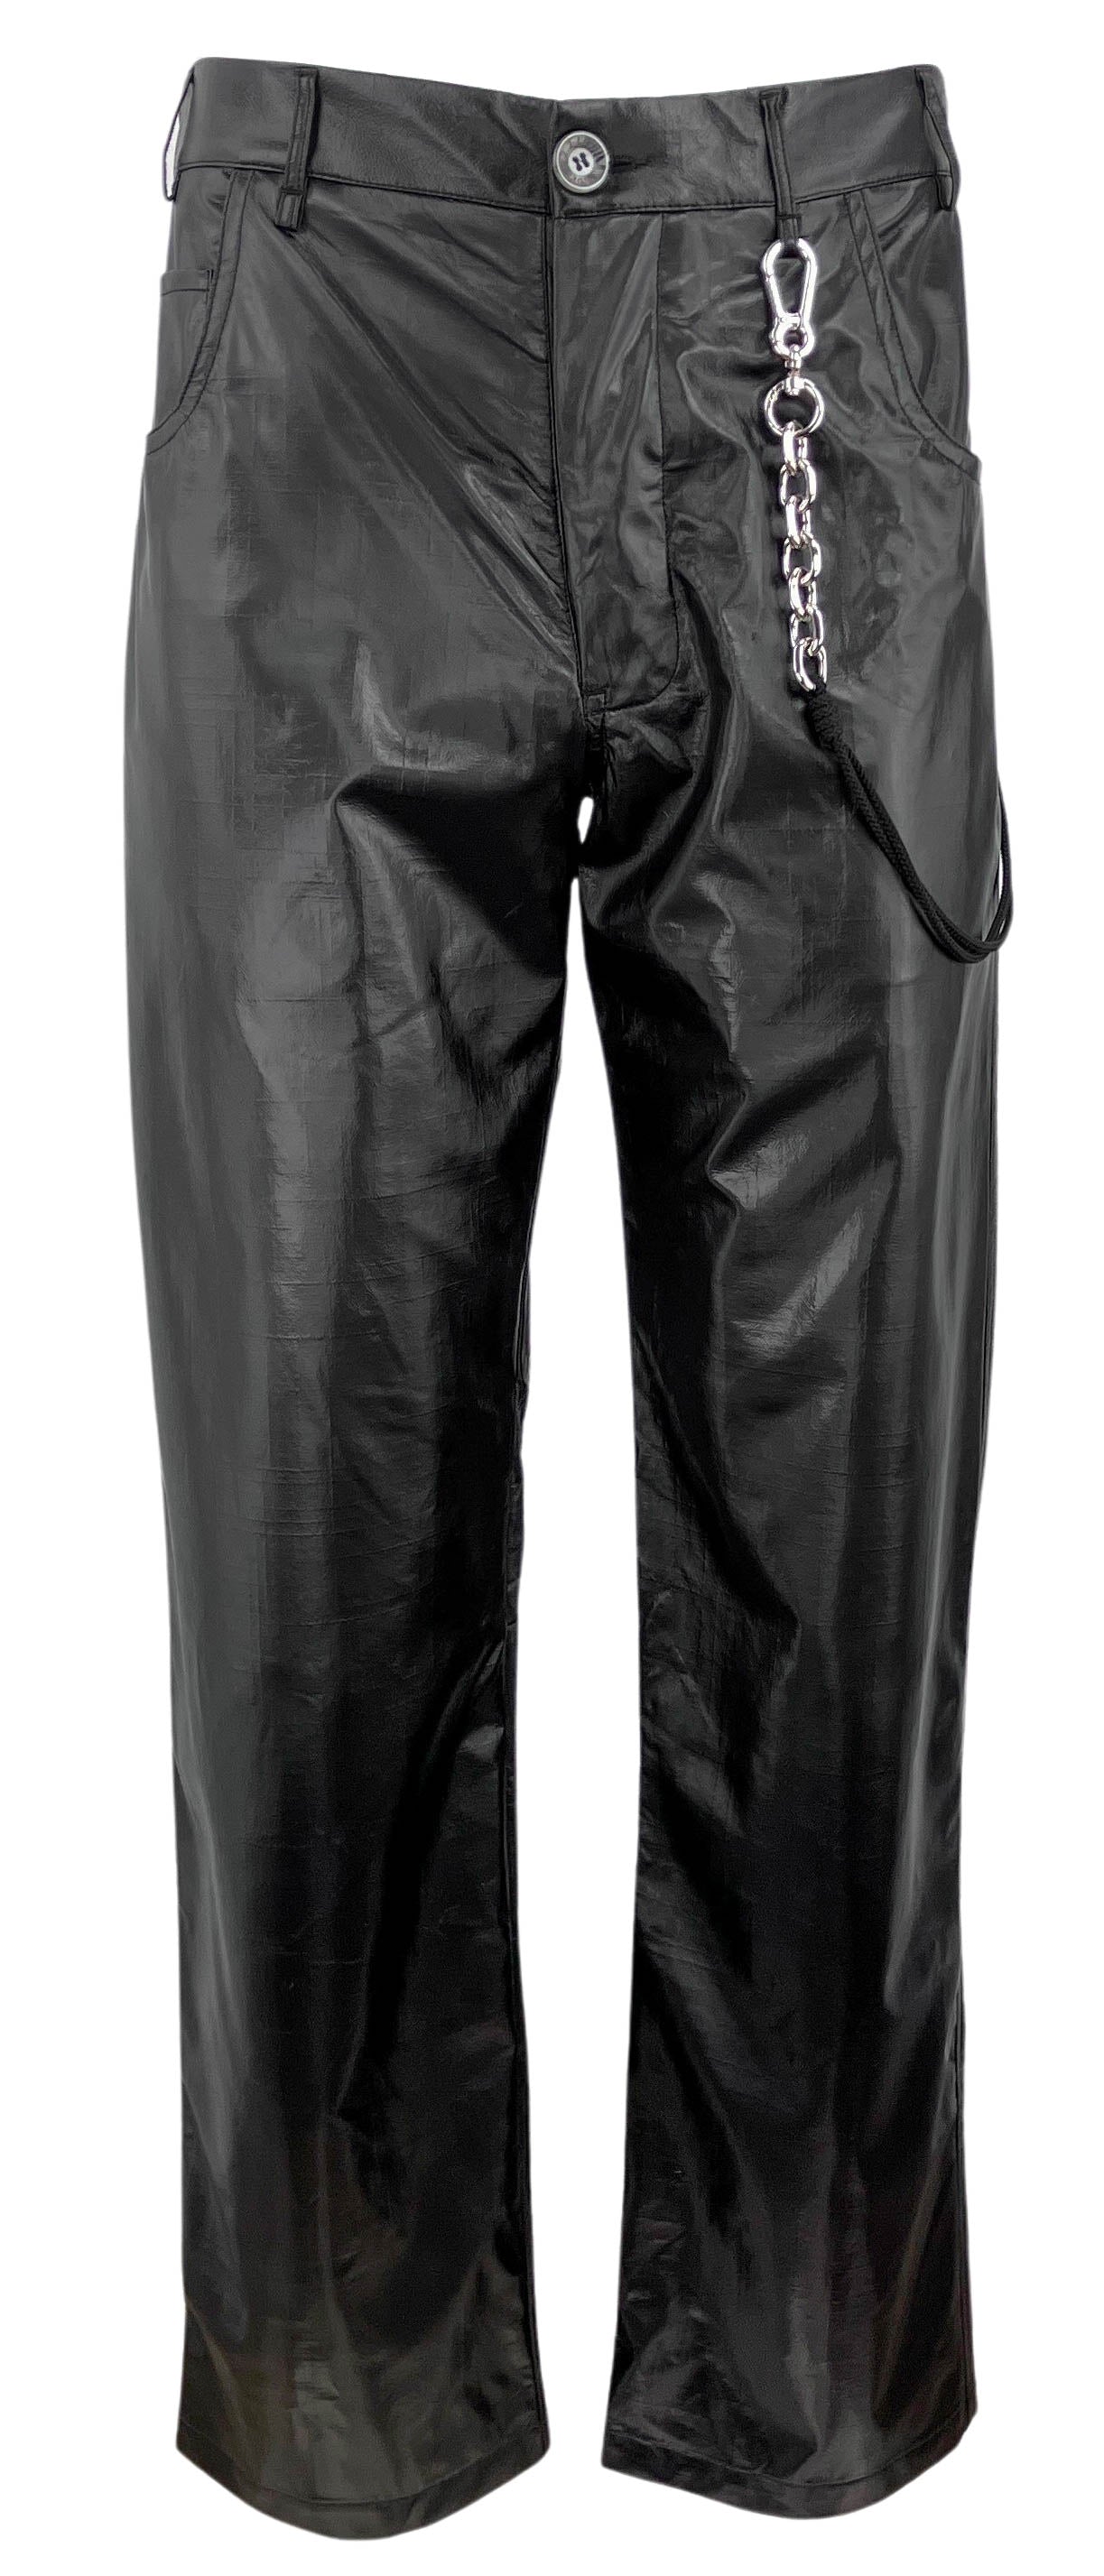 Song For The Mute Long Work Pant in Black - Discounts on Song For The Mute at UAL